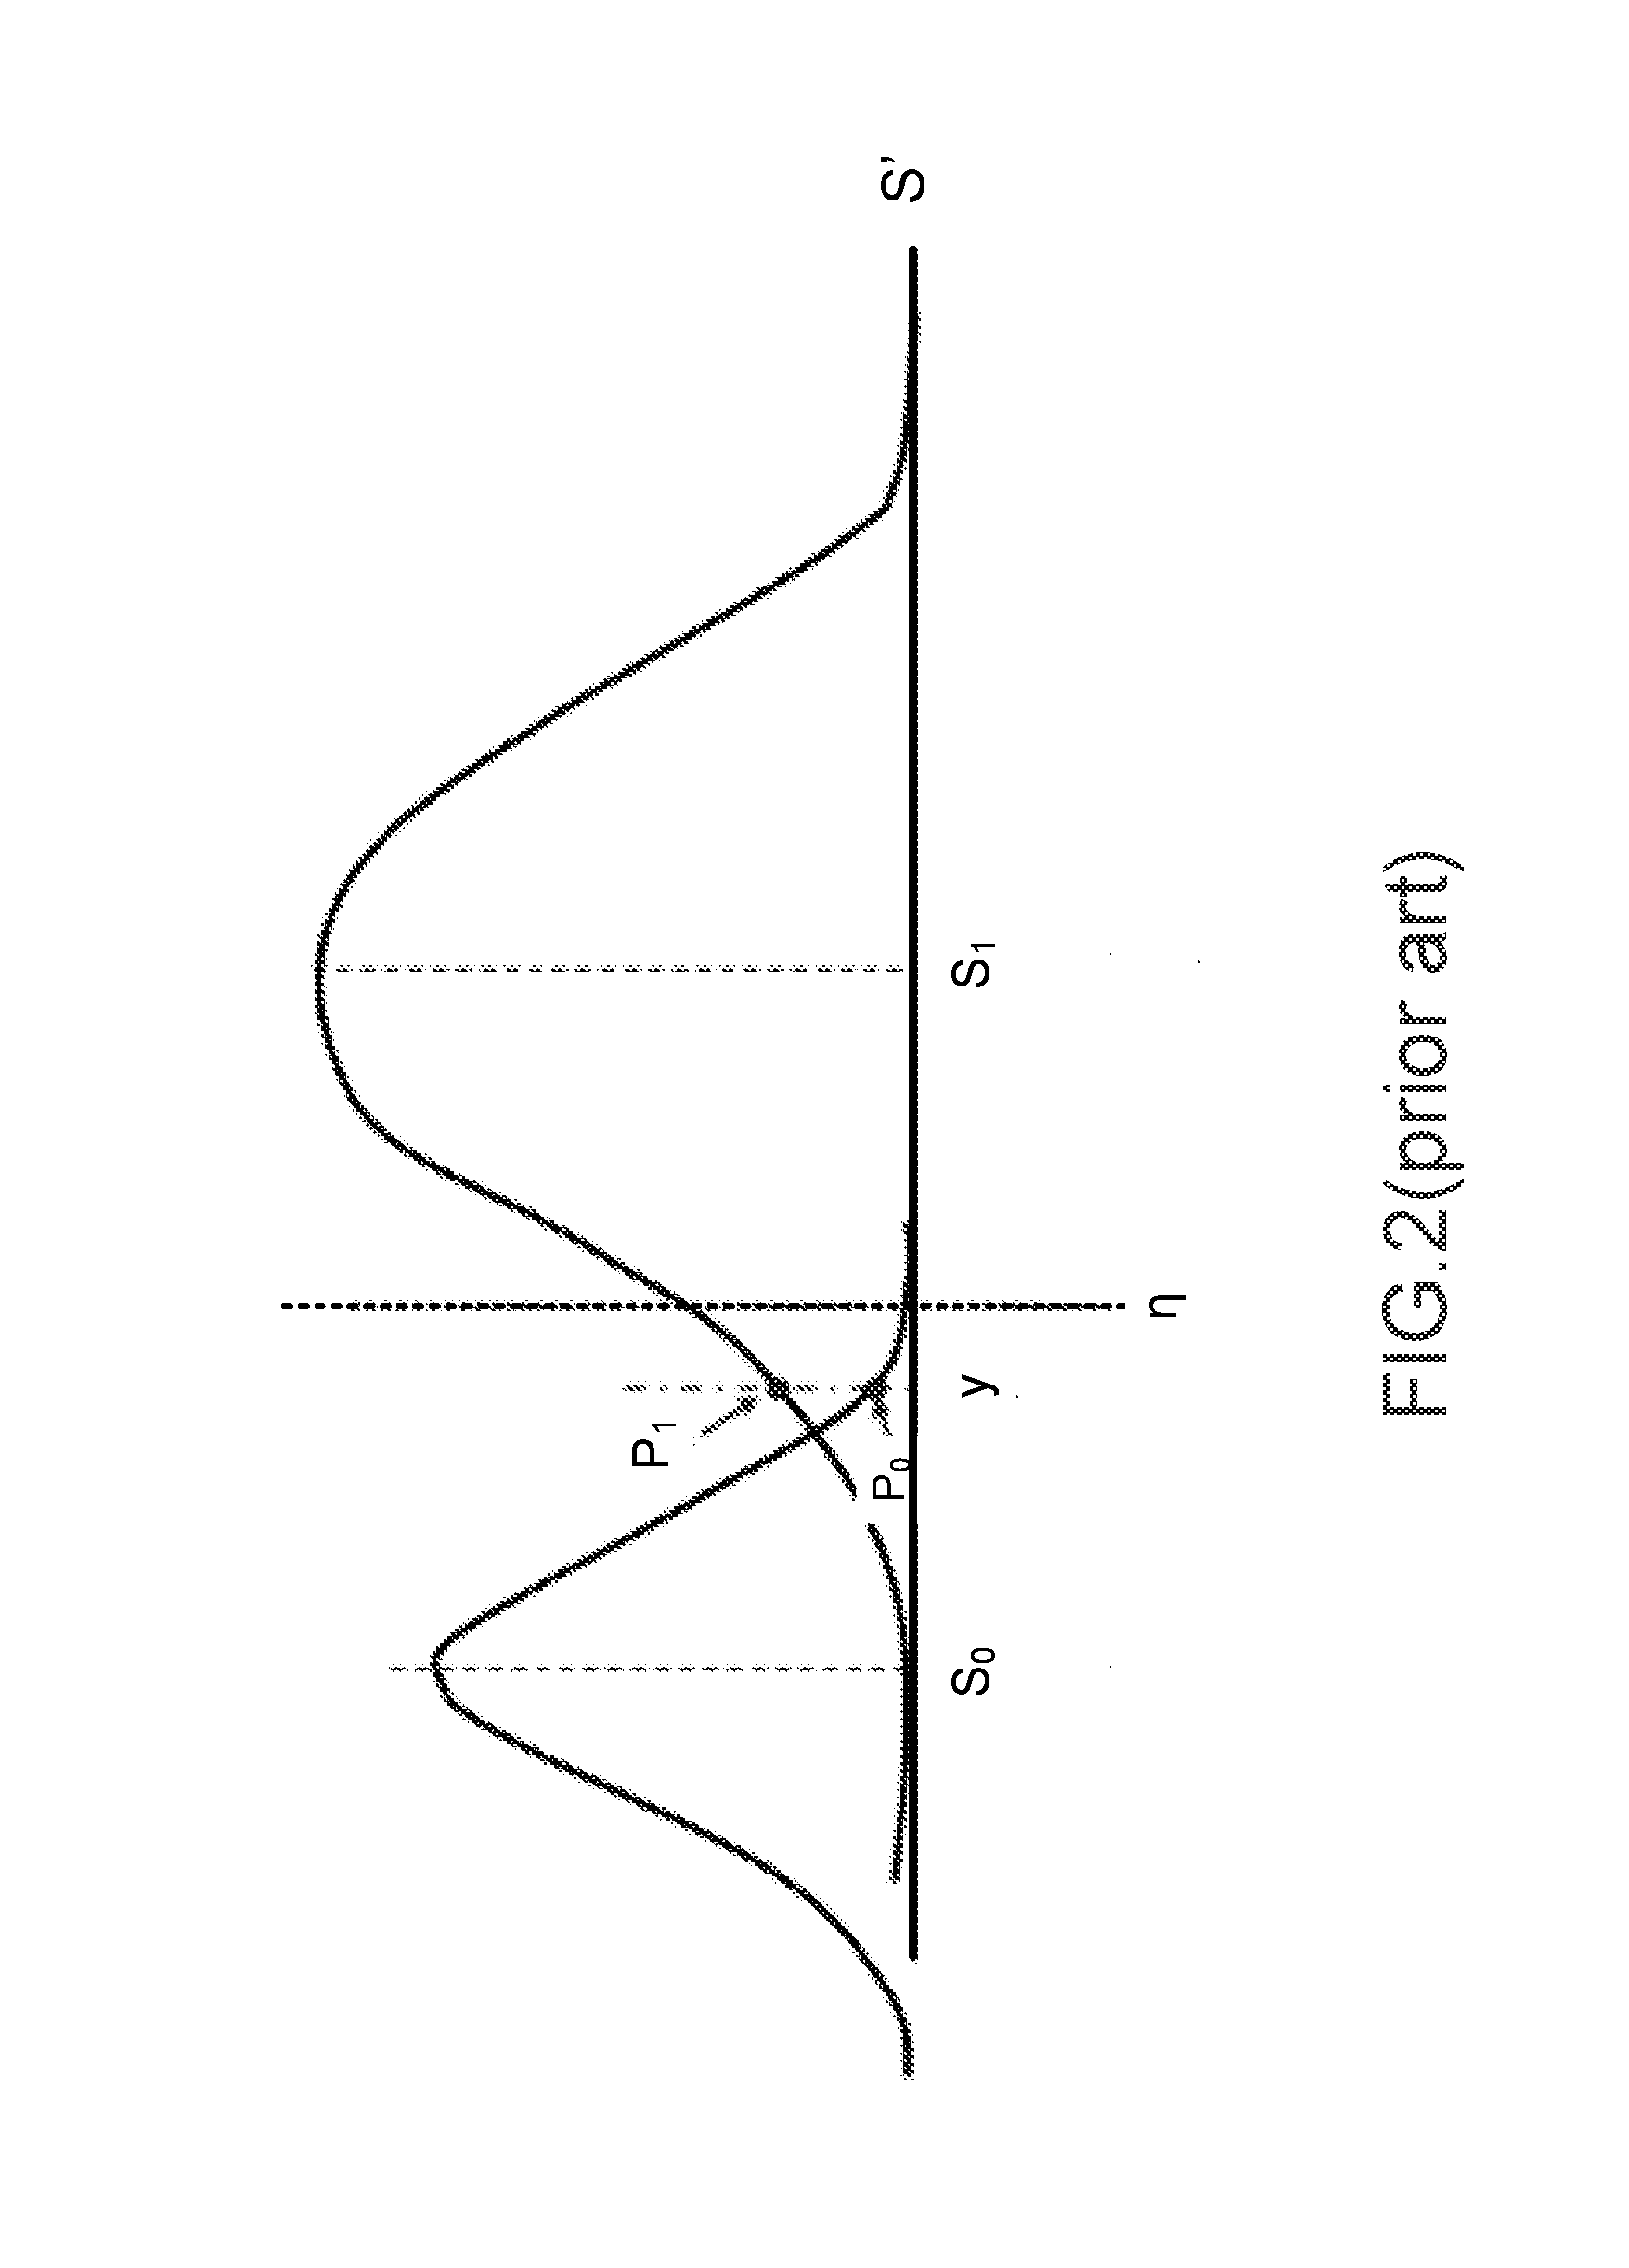 Signal receiver with adaptive soft information adjustment and associated signal processing method